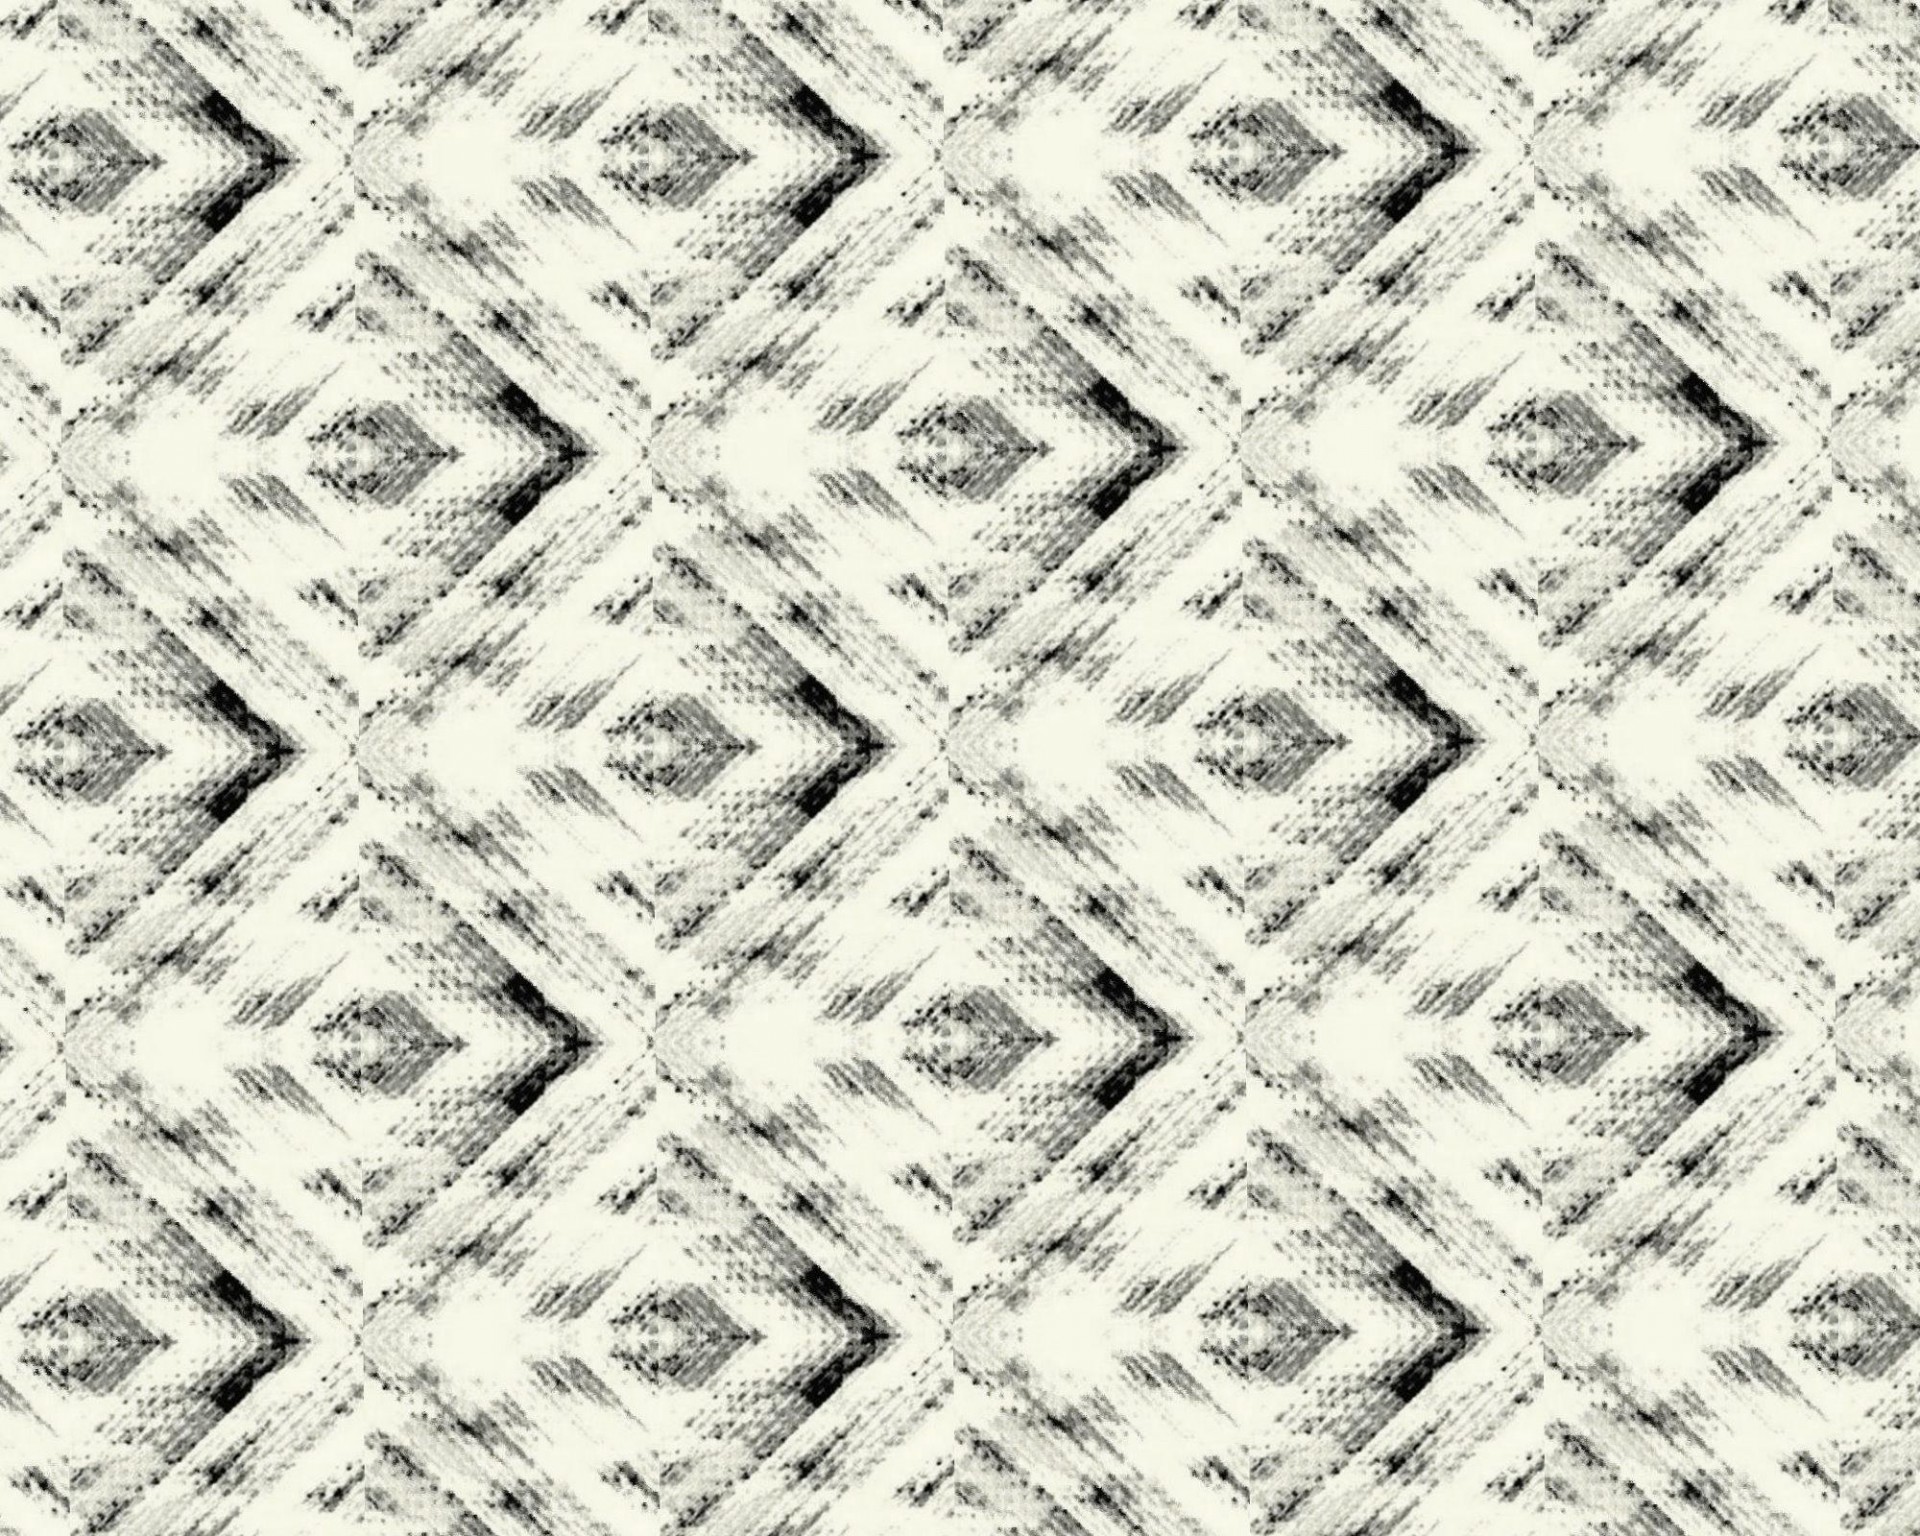 Black And White Patterned Paper (13)